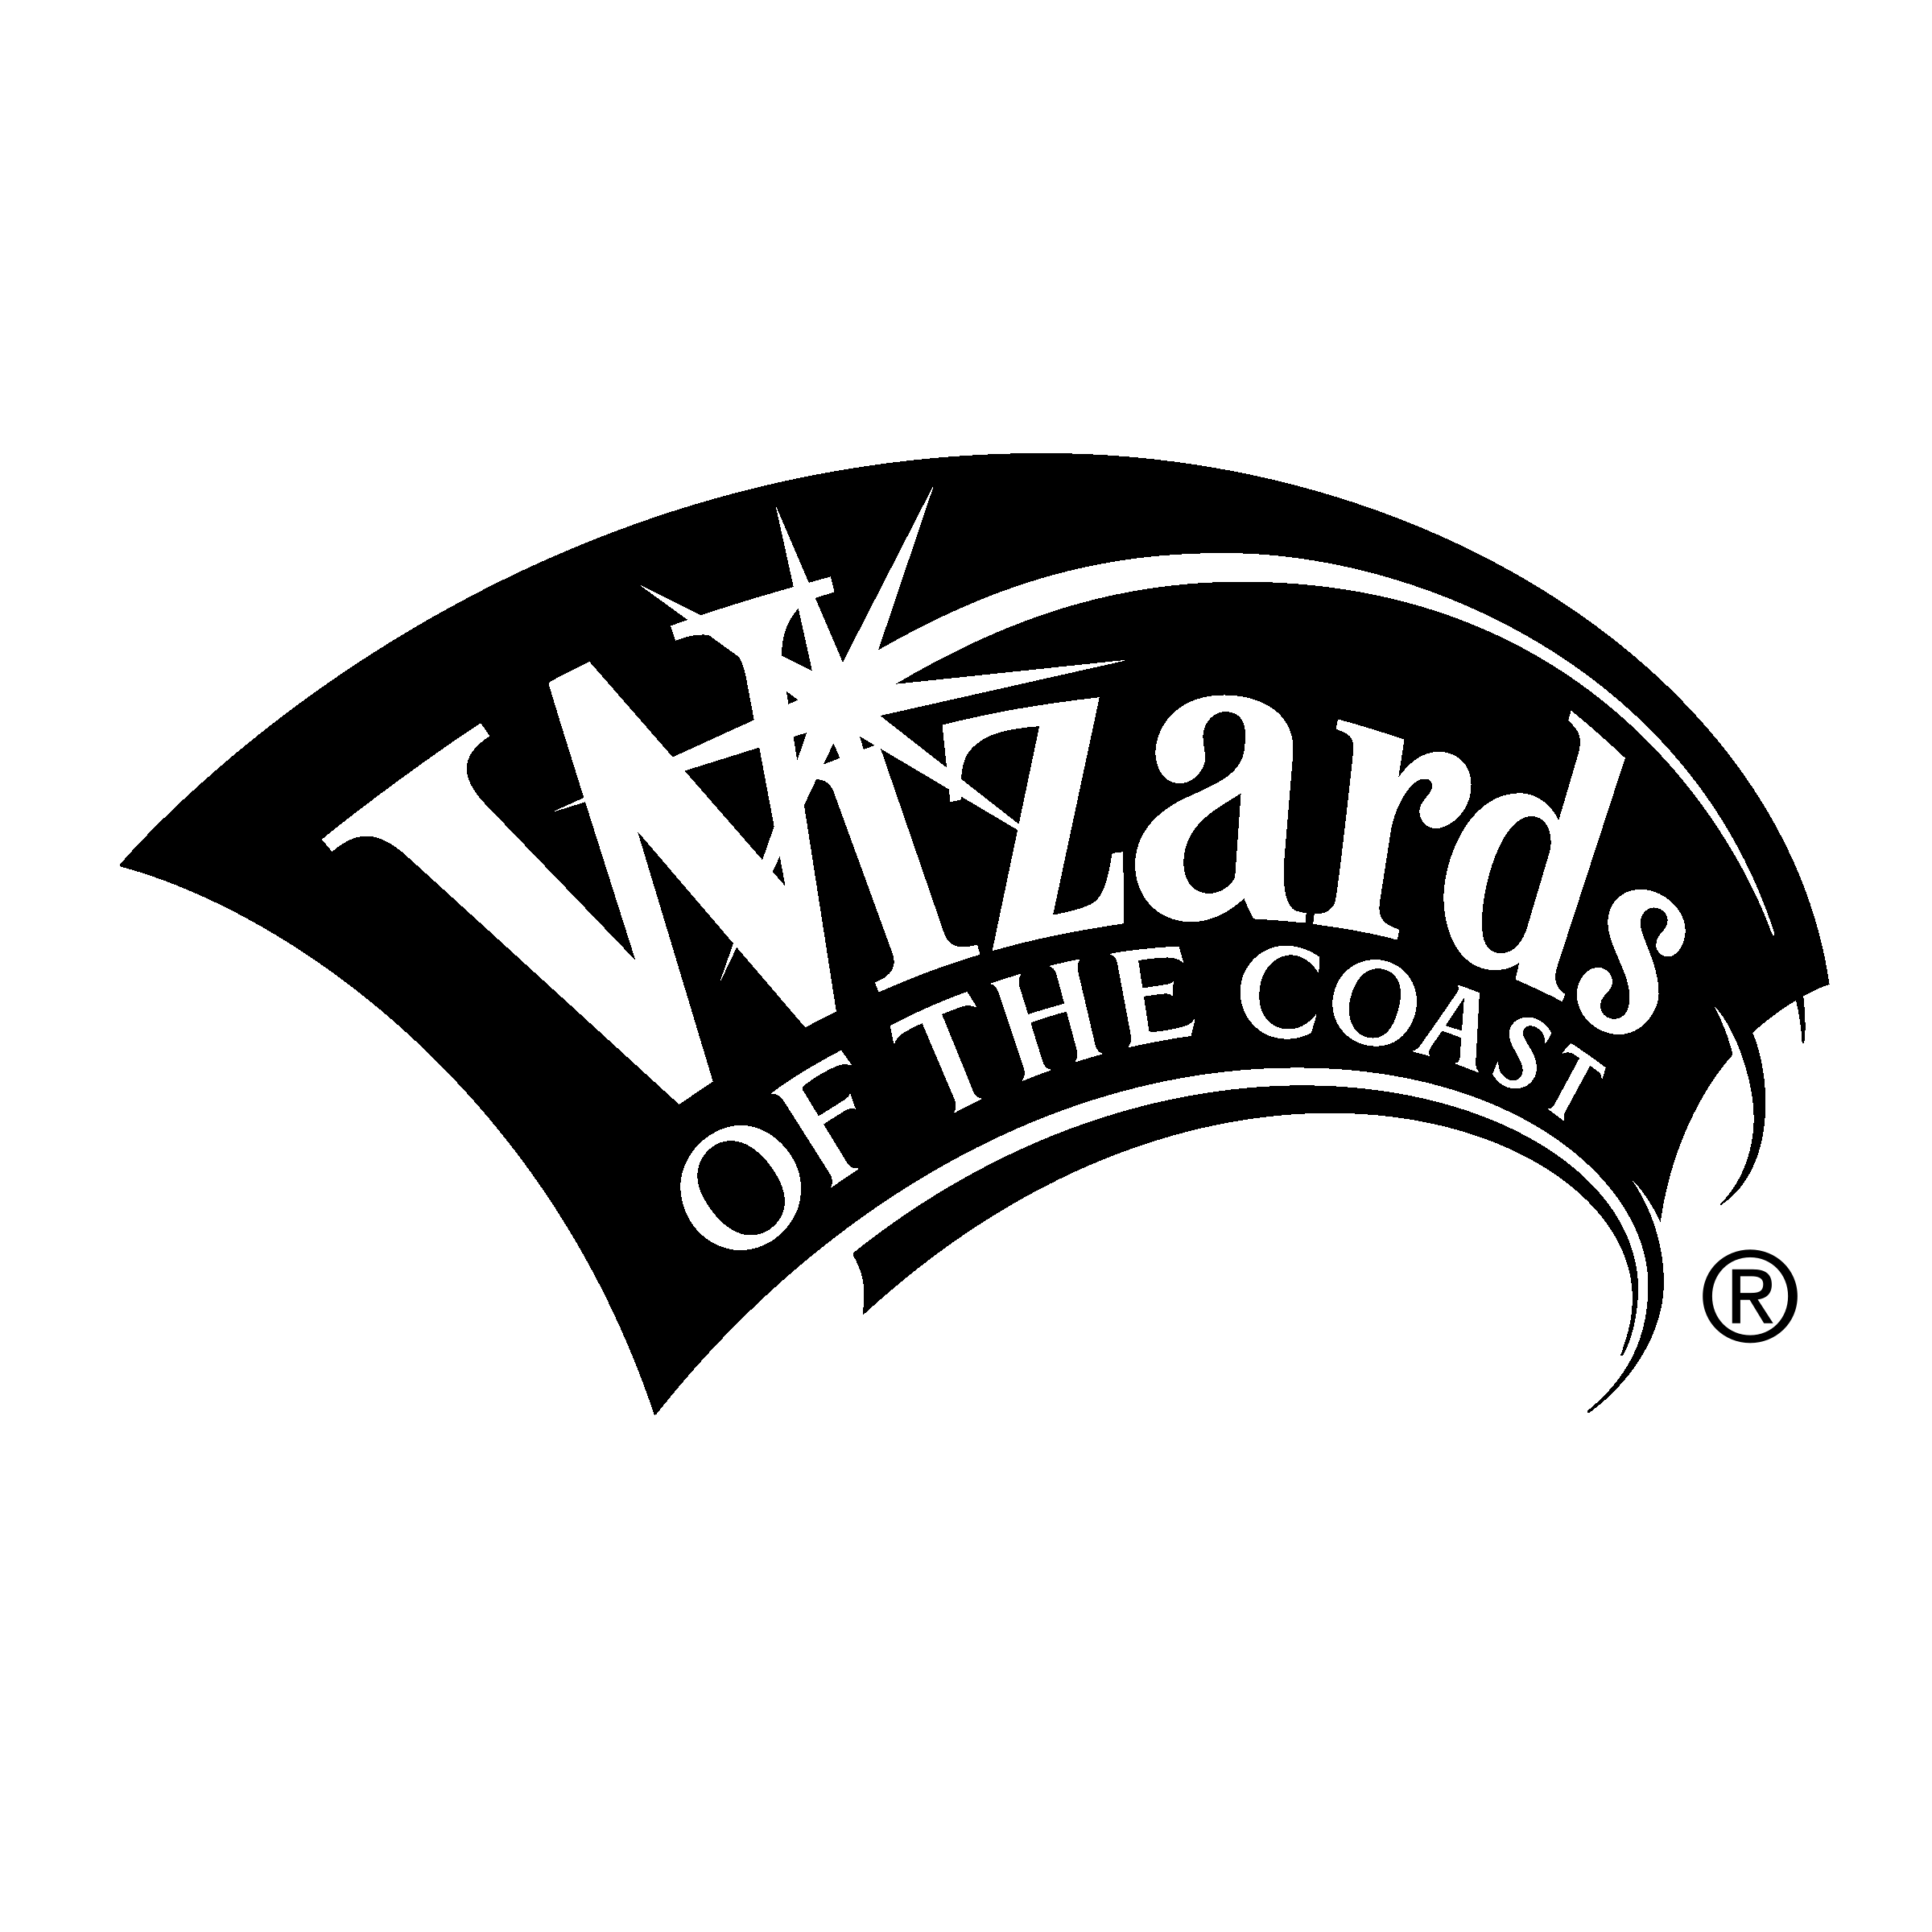 wizards-of-the-coast-logo-black-and-white.png